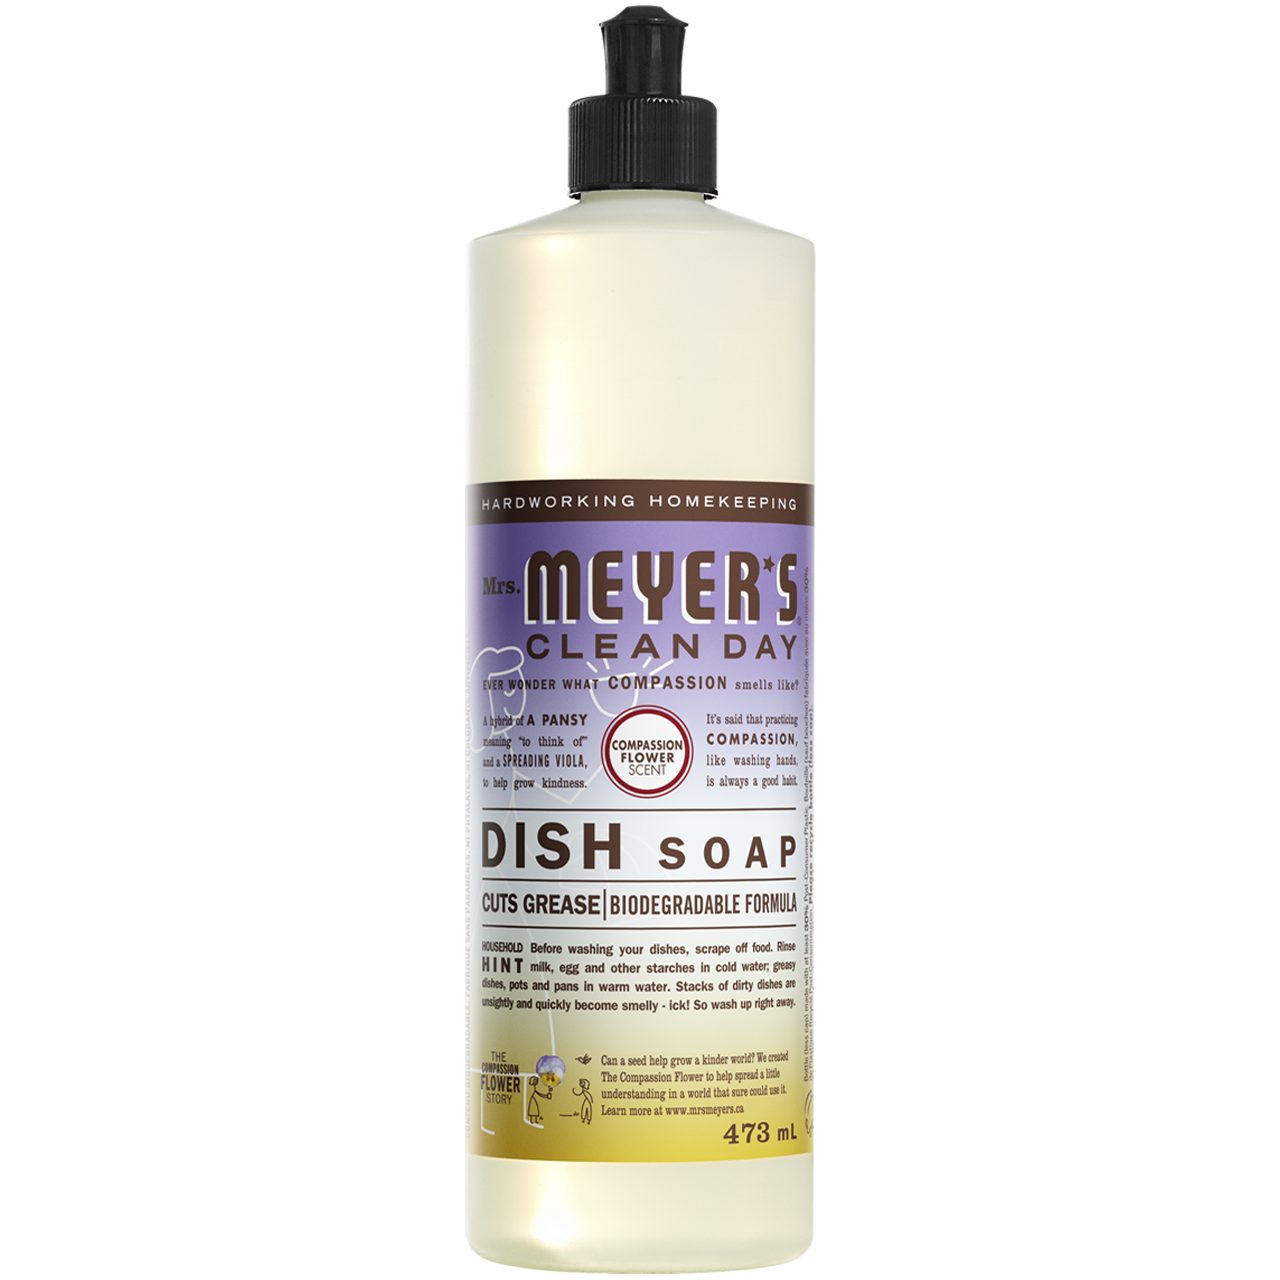 Mrs Meyers Compassion Flower Dish Soap